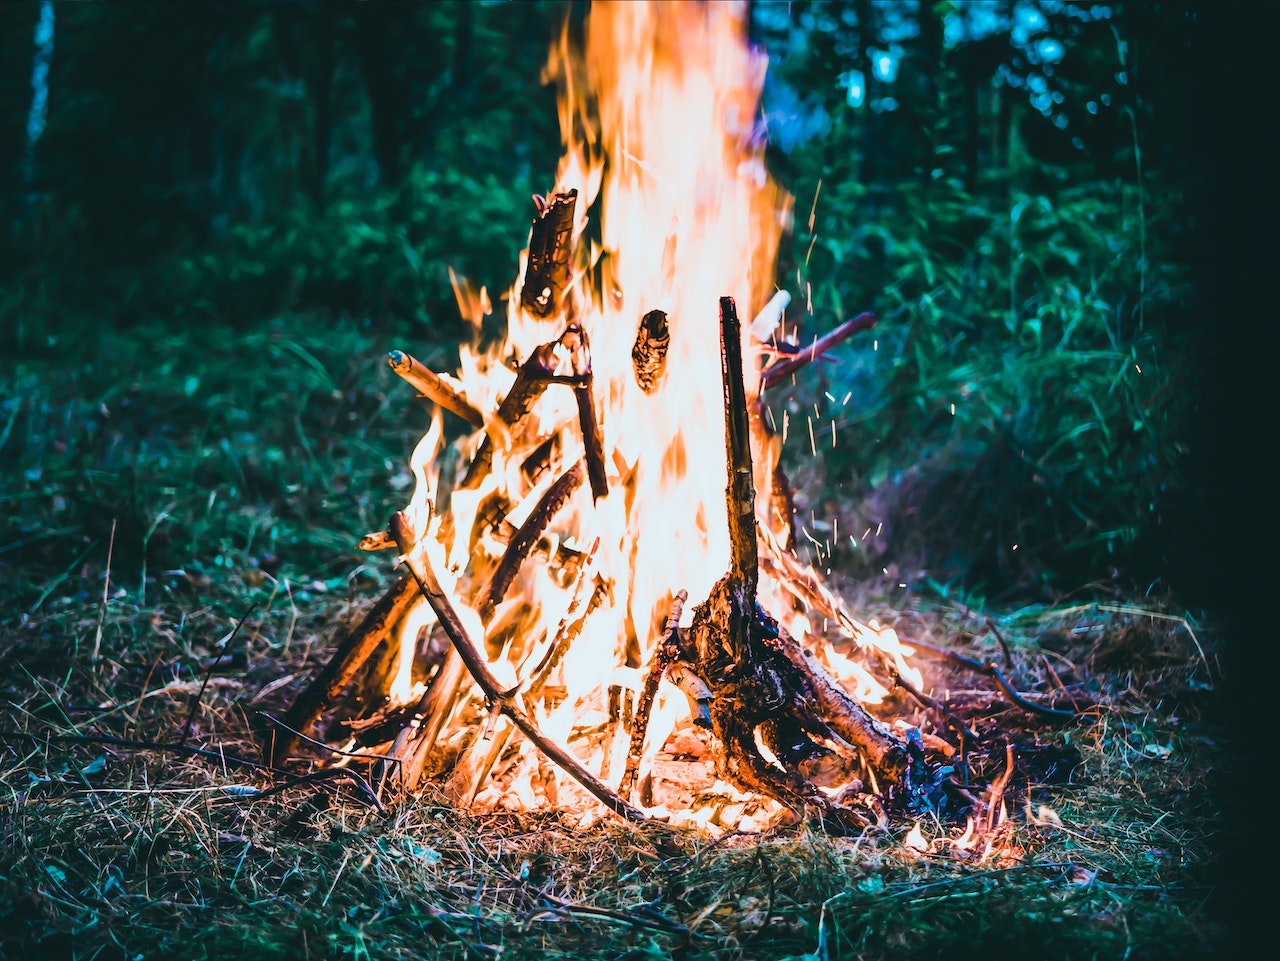 Bonfires Before 7pm: How to Deal With Bonfire Nuisance